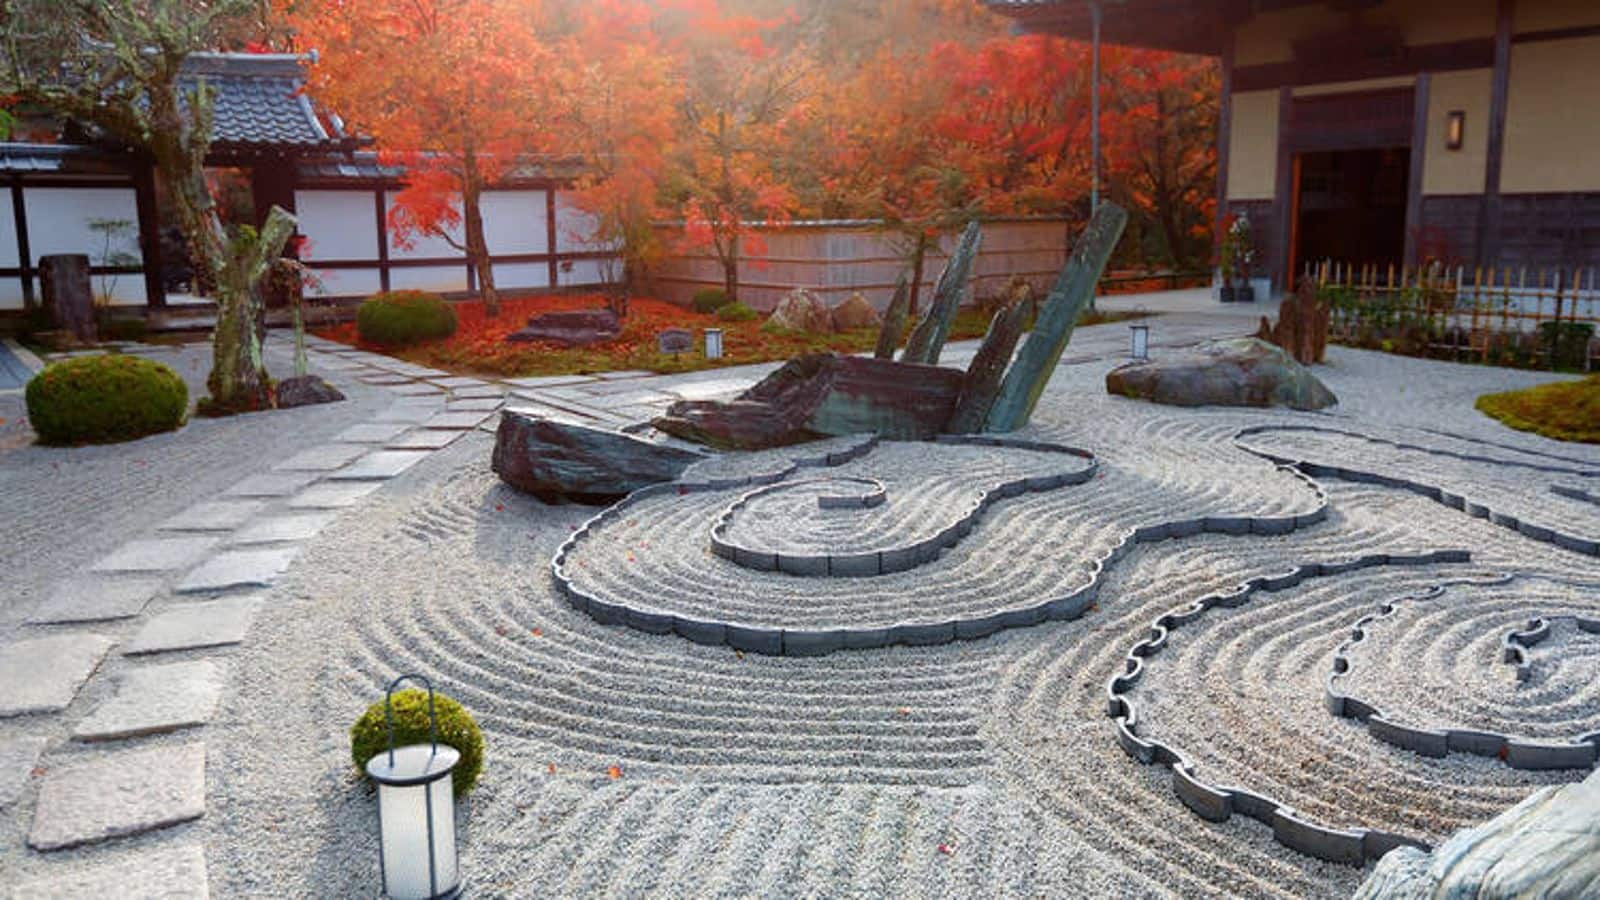 Head over to Kyoto's serene Zen gardens with this guide